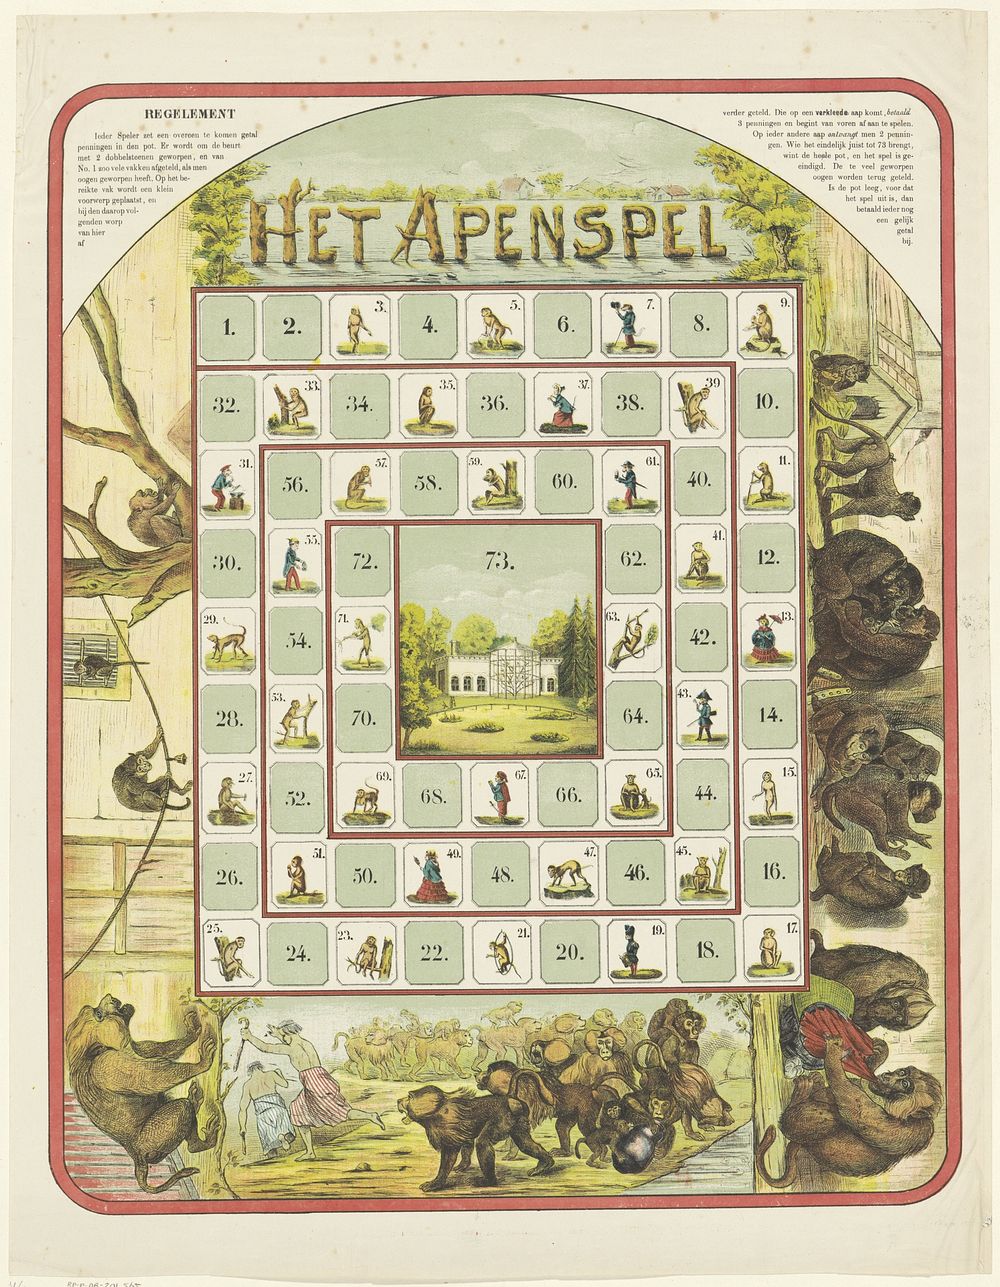 Het apenspel (c. 1800 - c. 1850) by anonymous and anonymous